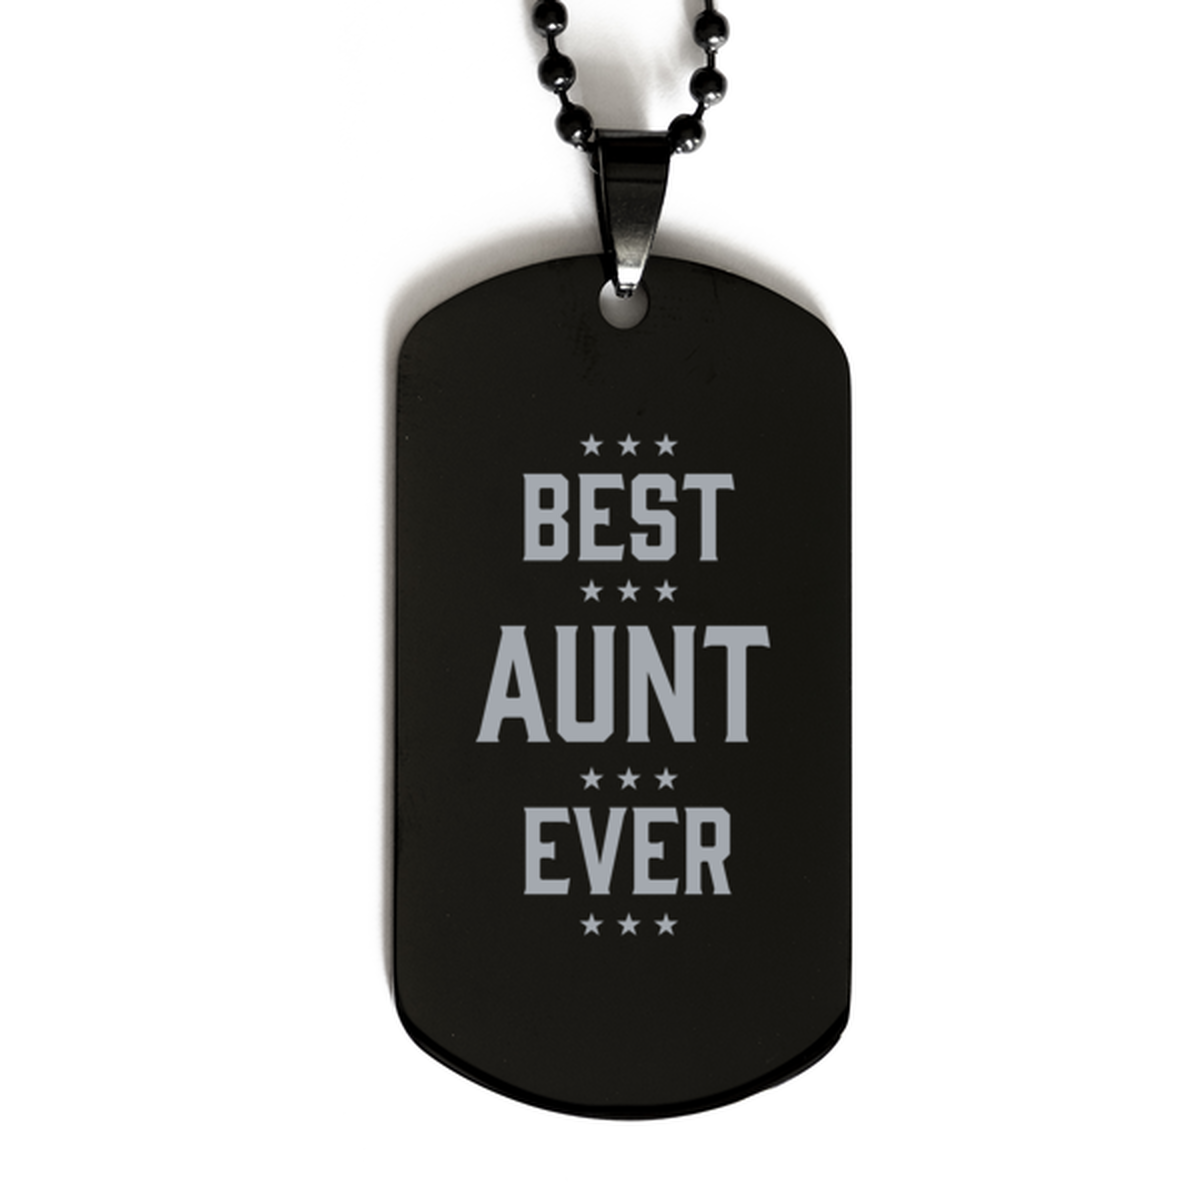 Best Aunt Ever Aunt Gifts, Funny Black Dog Tag For Aunt, Birthday Family Presents Engraved Necklace For Women